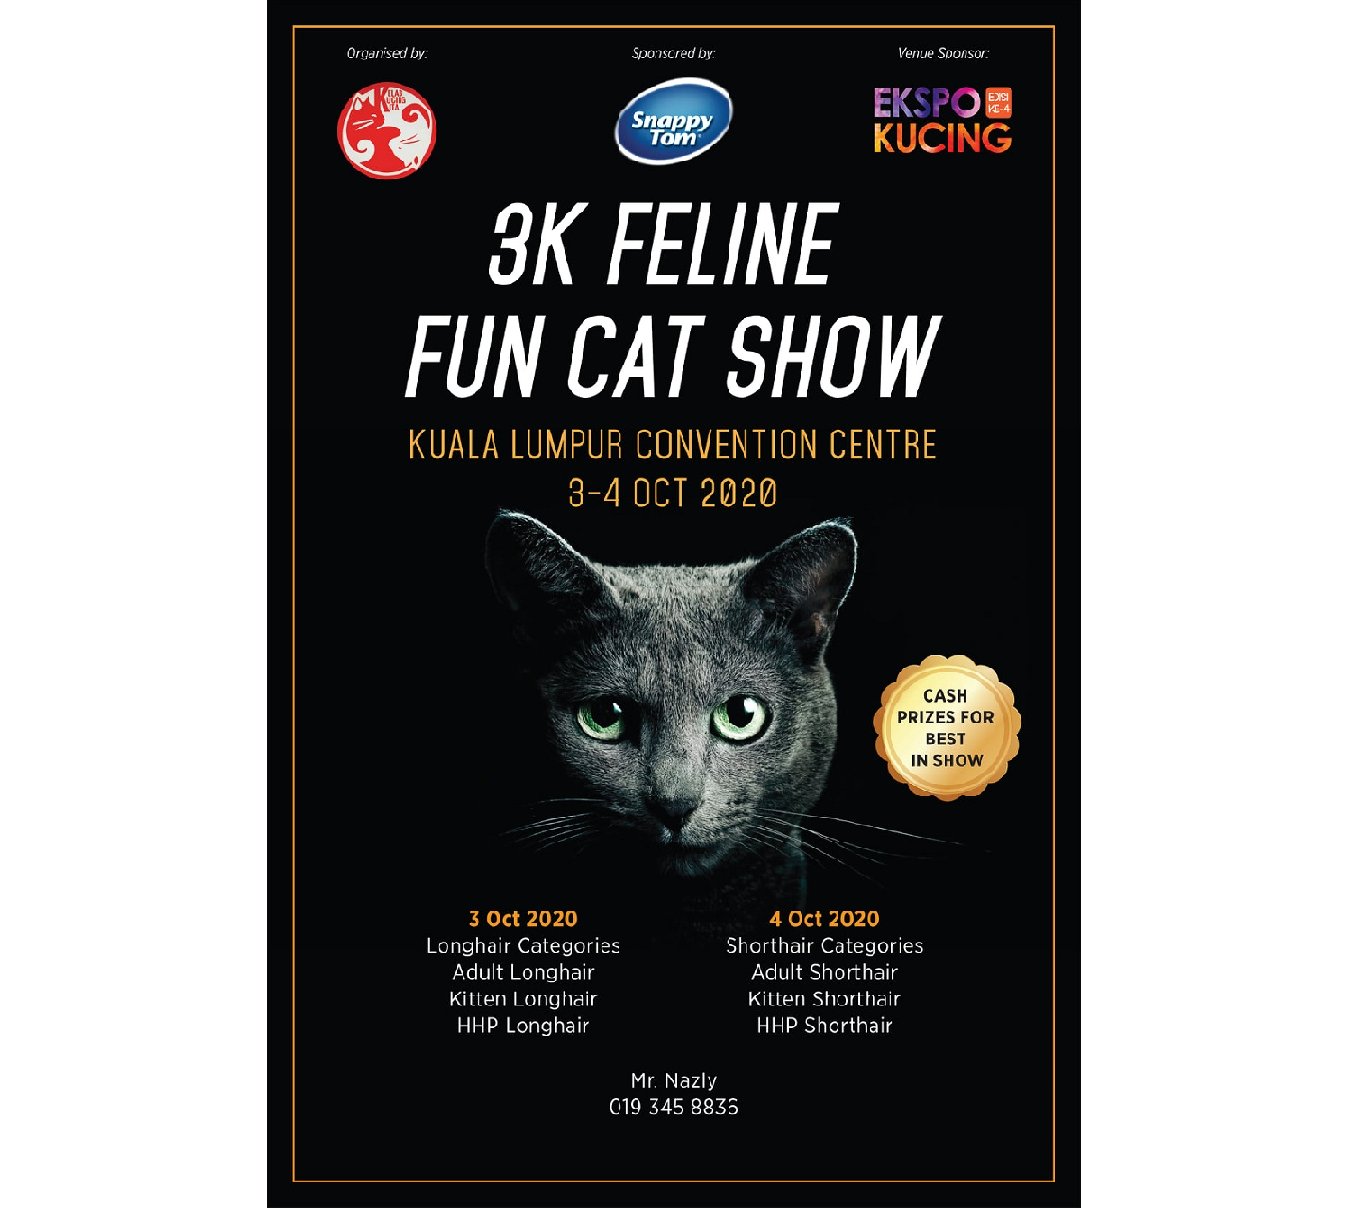 The 3K Feline Fun Cat Show is happening on October 3 to October 4 taking place at the Kuala Lumpur Convention Centre (KLCC). u00e2u20acu2022 Picture via Facebook/Ekspo Kucing